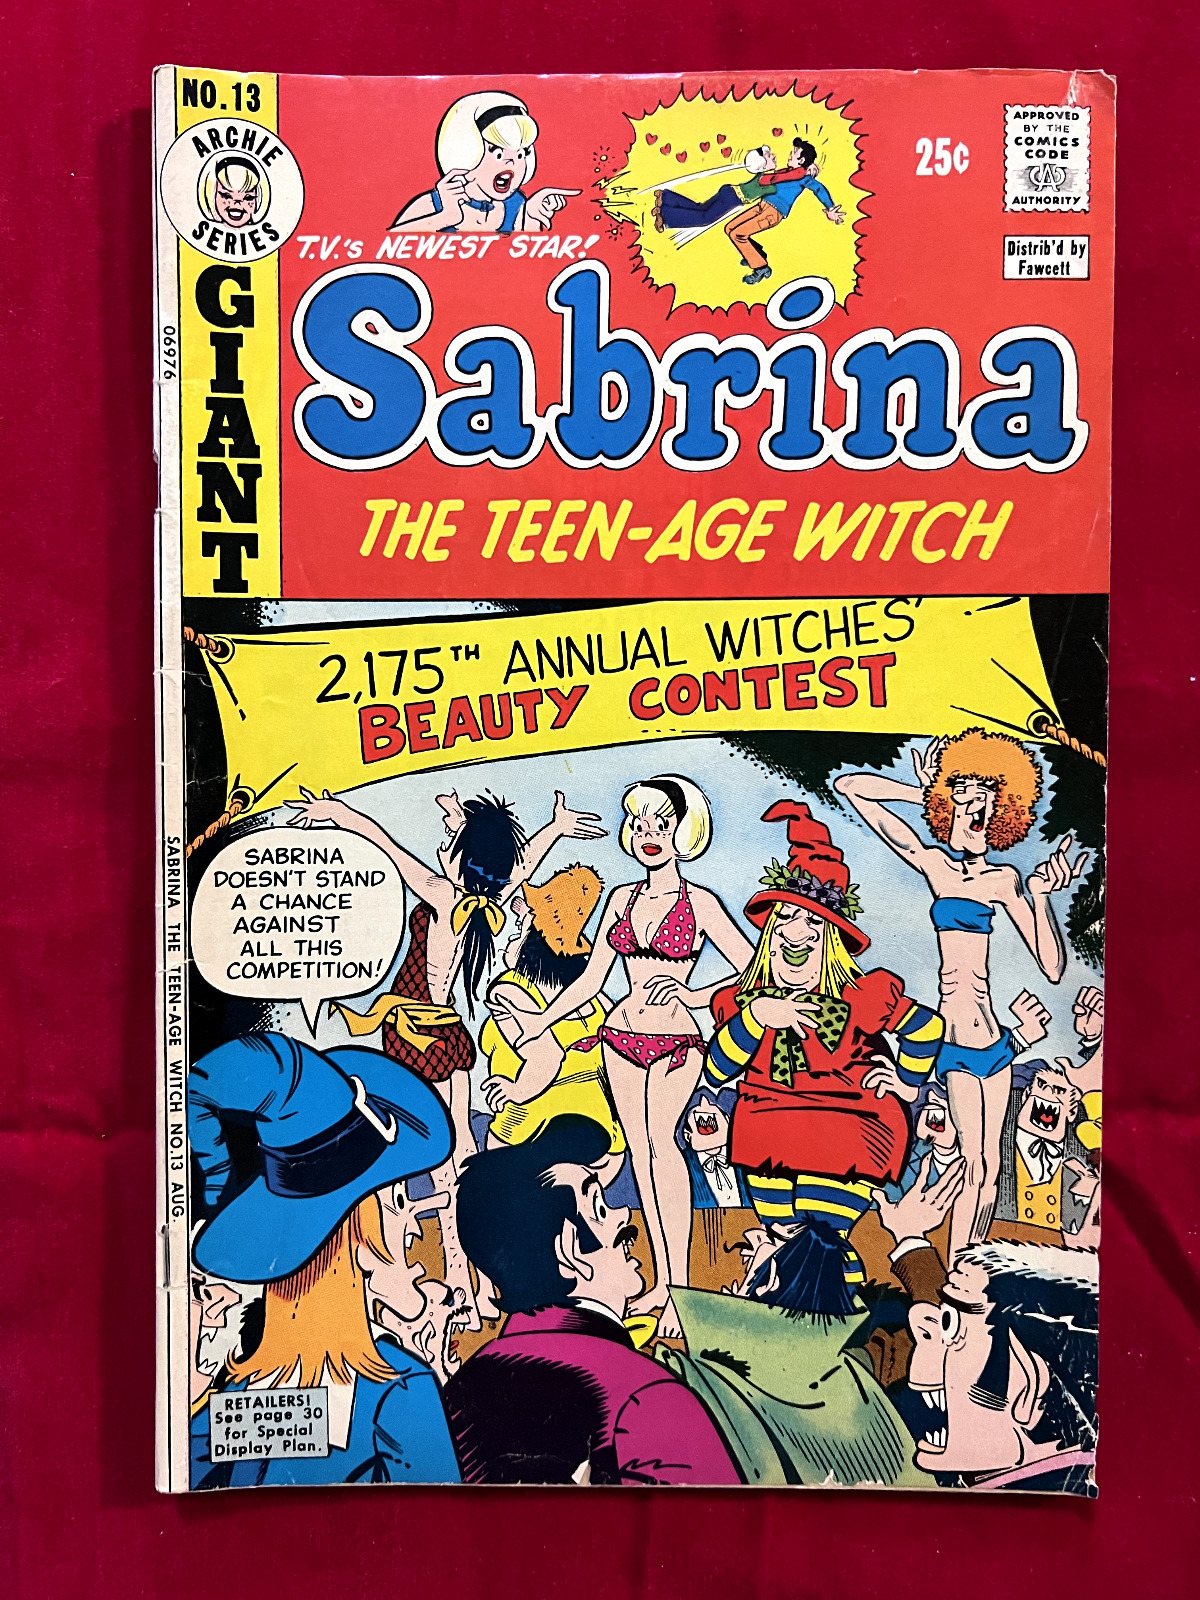 Sabrina, the Teen-Age Witch #13 (Archie 1973) Swimsuit Contest Bikini Cover